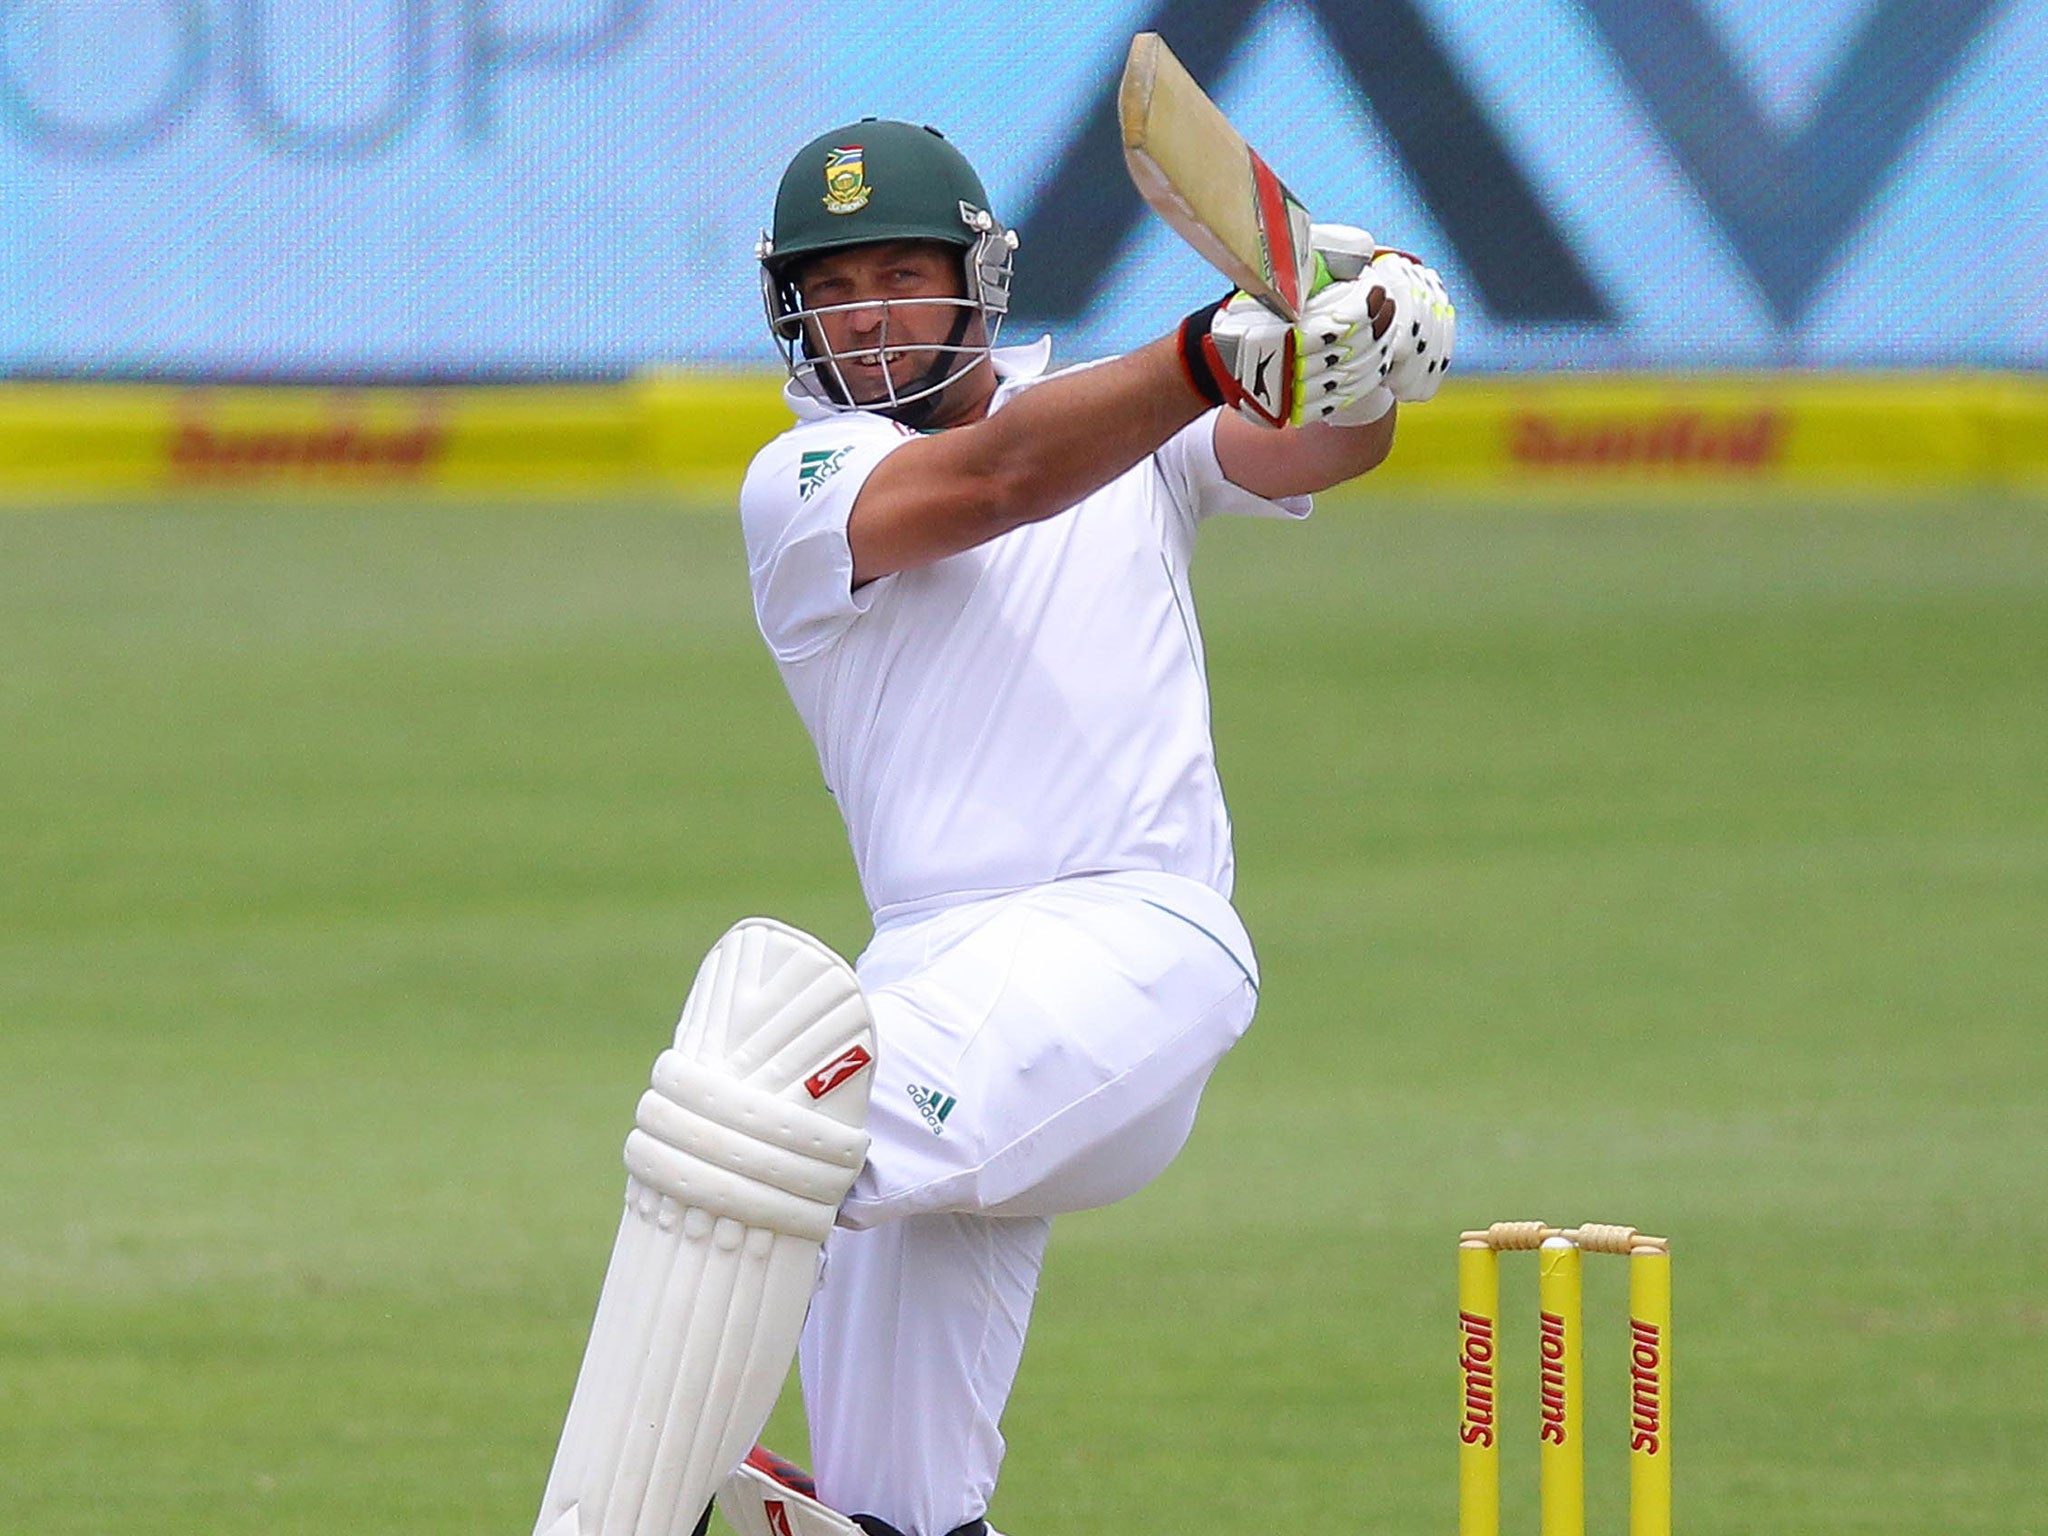 A glittering career has seen Jacques Kallis rack up more than 13,000 Test runs and 290 wickets